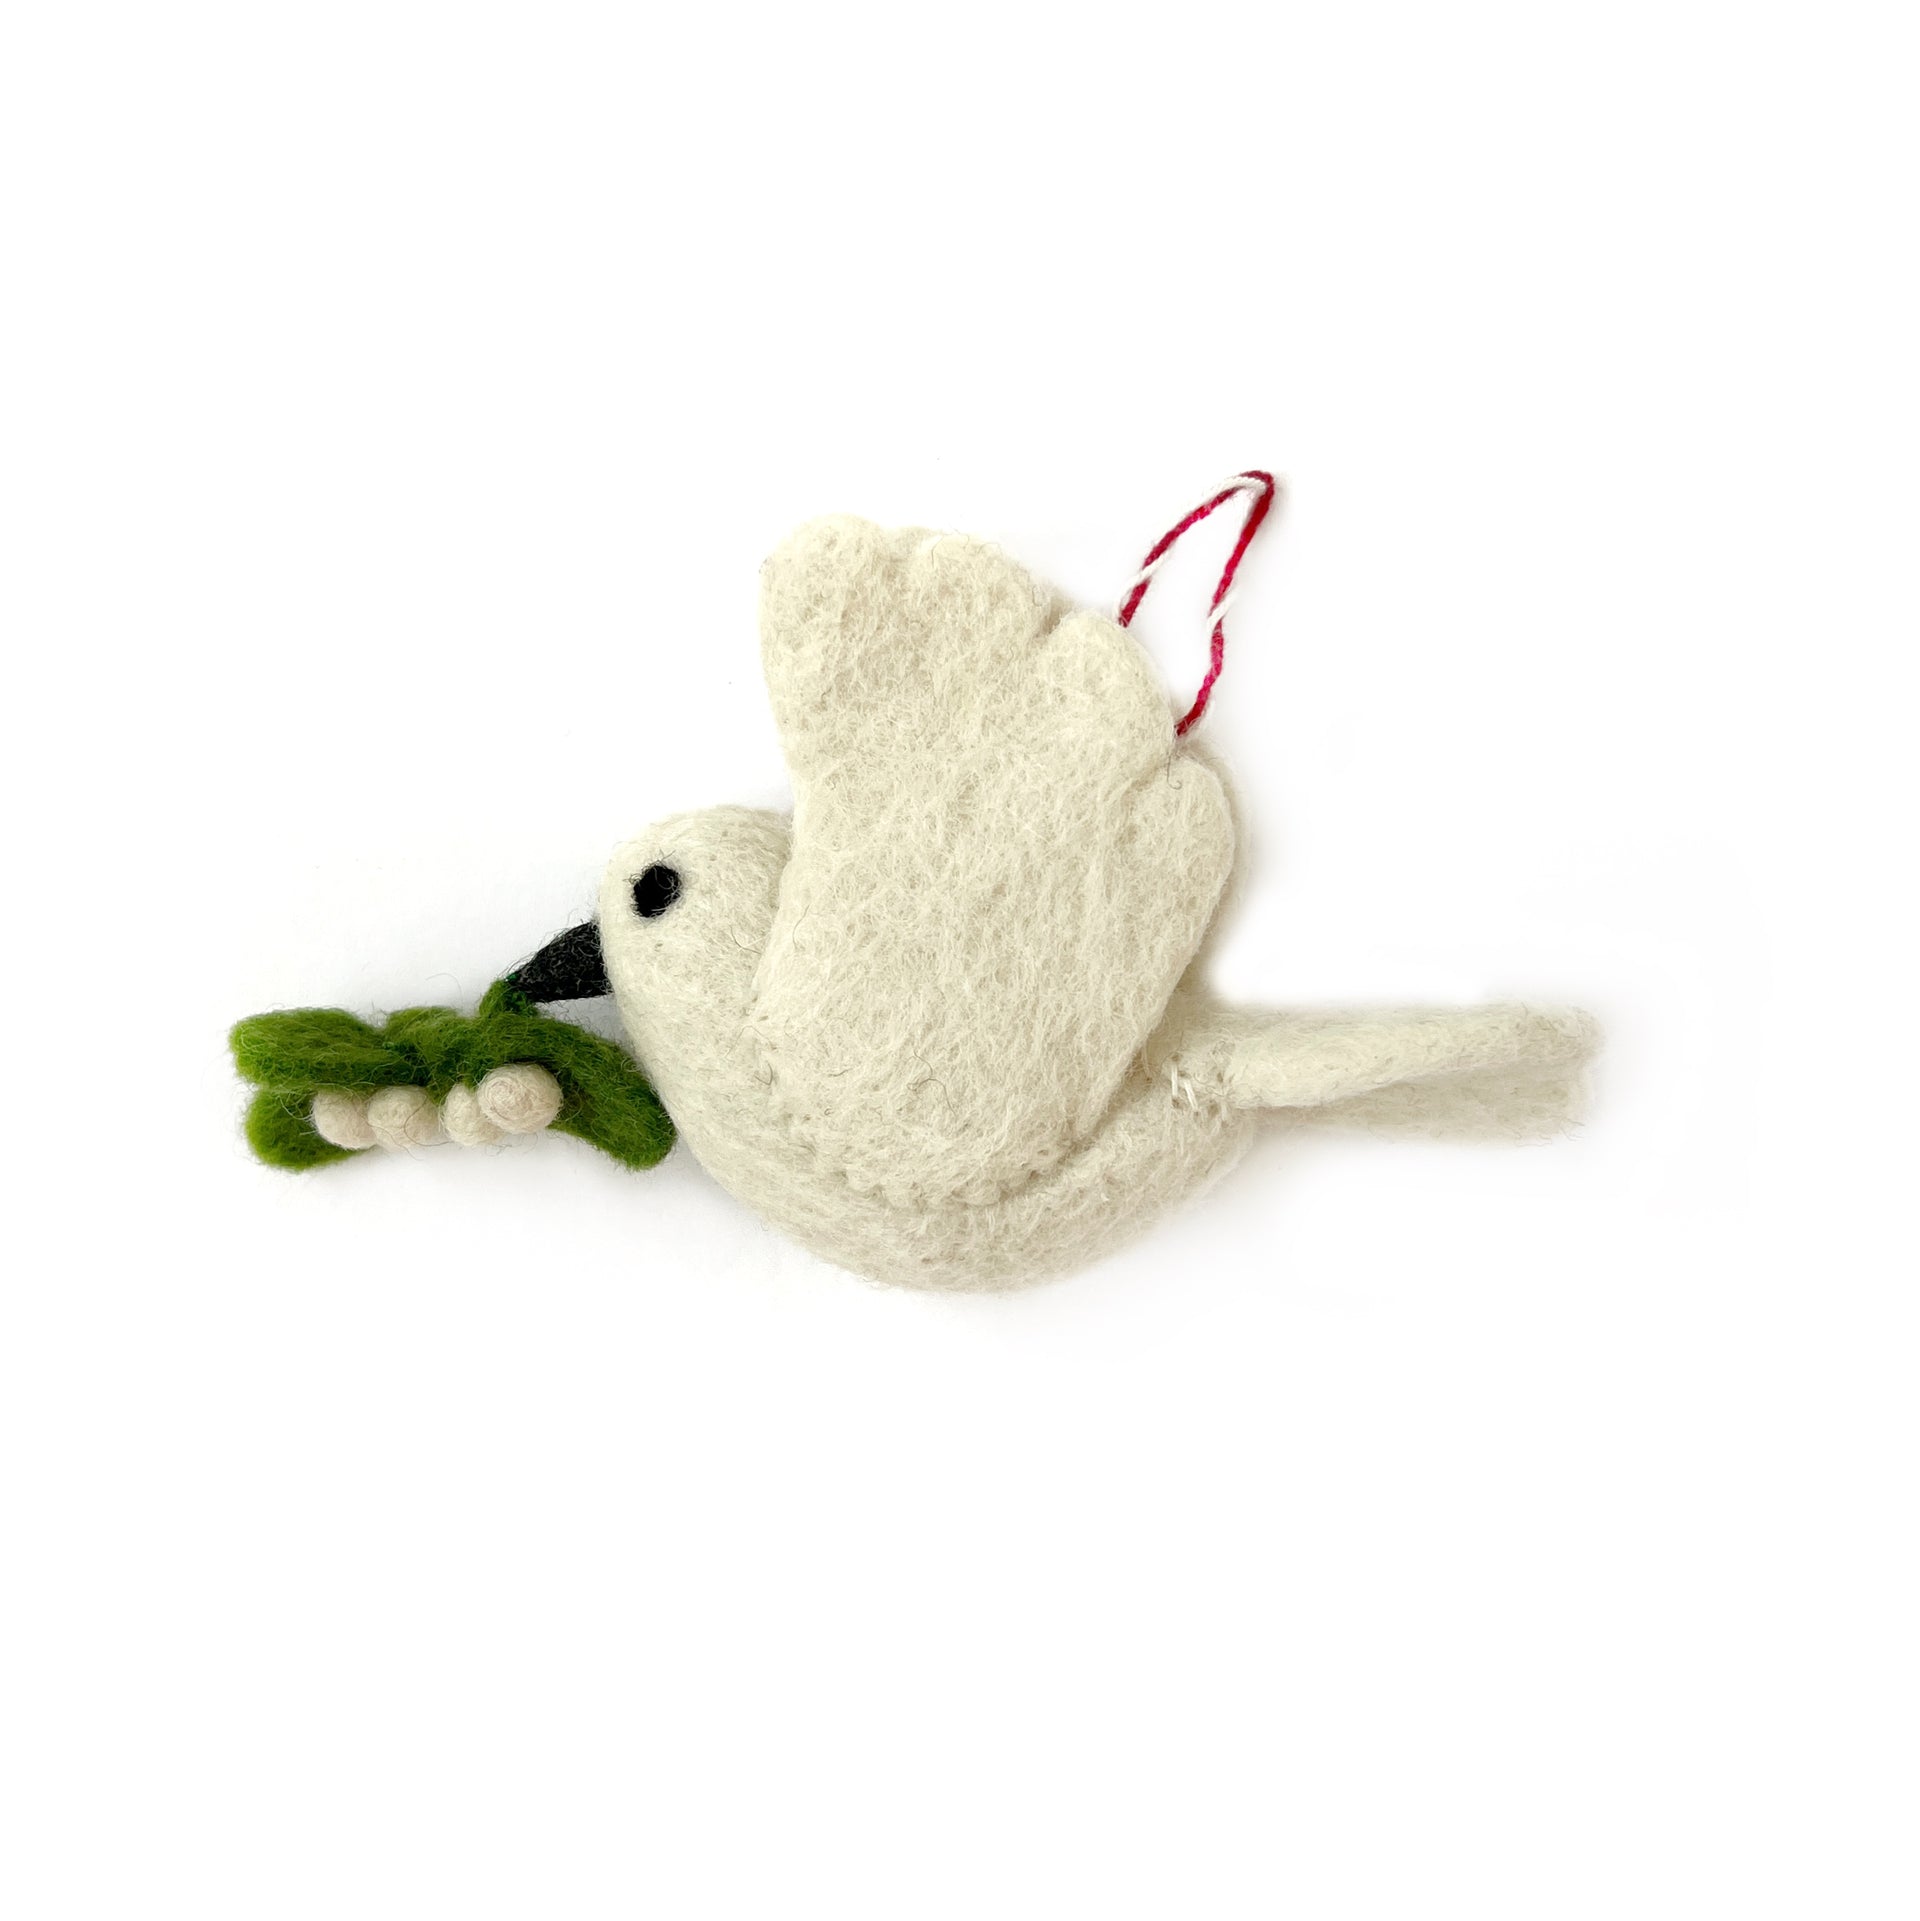 Dove with Olive Branch Ornament, Felt Wool